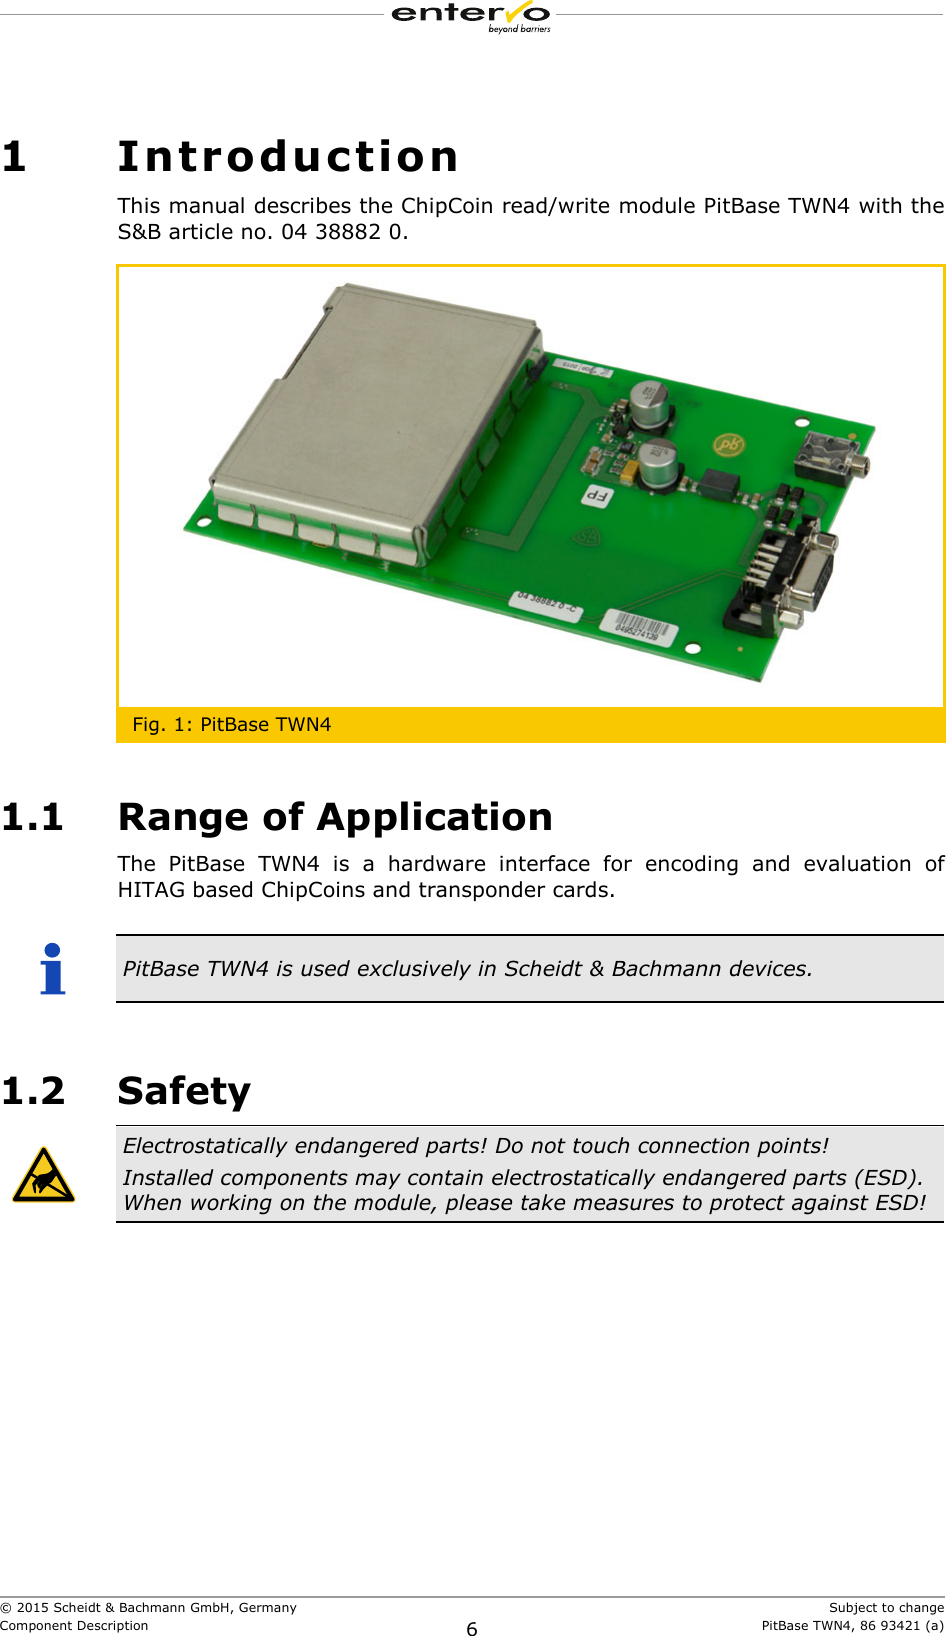  © 2015 Scheidt &amp; Bachmann GmbH, Germany    Subject to changeComponent Description 6 PitBase TWN4, 86 93421 (a) 1 Introduction This manual describes the ChipCoin read/write module PitBase TWN4 with the S&amp;B article no. 04 38882 0.  Fig. 1: PitBase TWN4 1.1 Range of Application The PitBase TWN4 is a hardware interface for encoding and evaluation of HITAG based ChipCoins and transponder cards.         PitBase TWN4 is used exclusively in Scheidt &amp; Bachmann devices.  1.2 Safety  Electrostatically endangered parts! Do not touch connection points! Installed components may contain electrostatically endangered parts (ESD). When working on the module, please take measures to protect against ESD!  